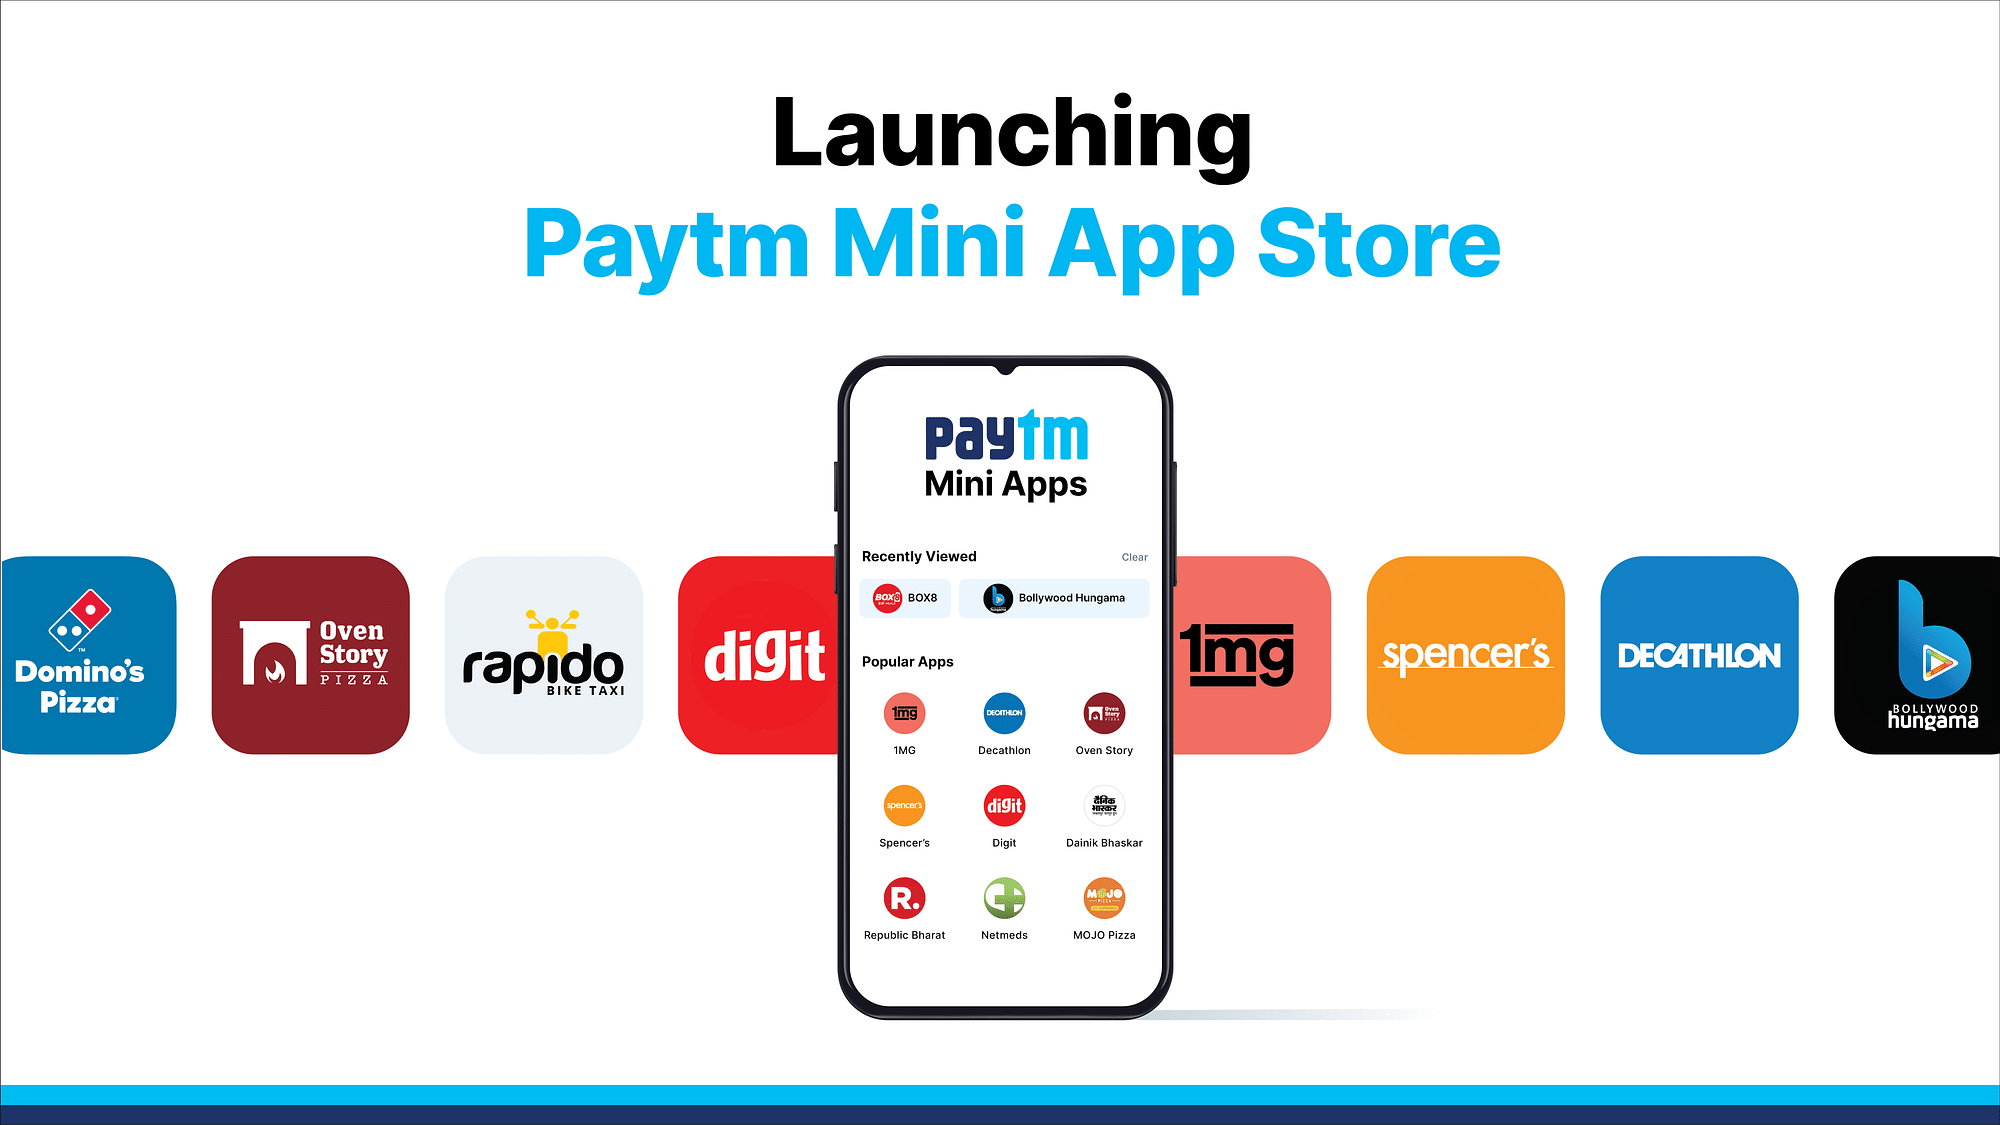 Paytm has launched its Mini App Store.&nbsp;